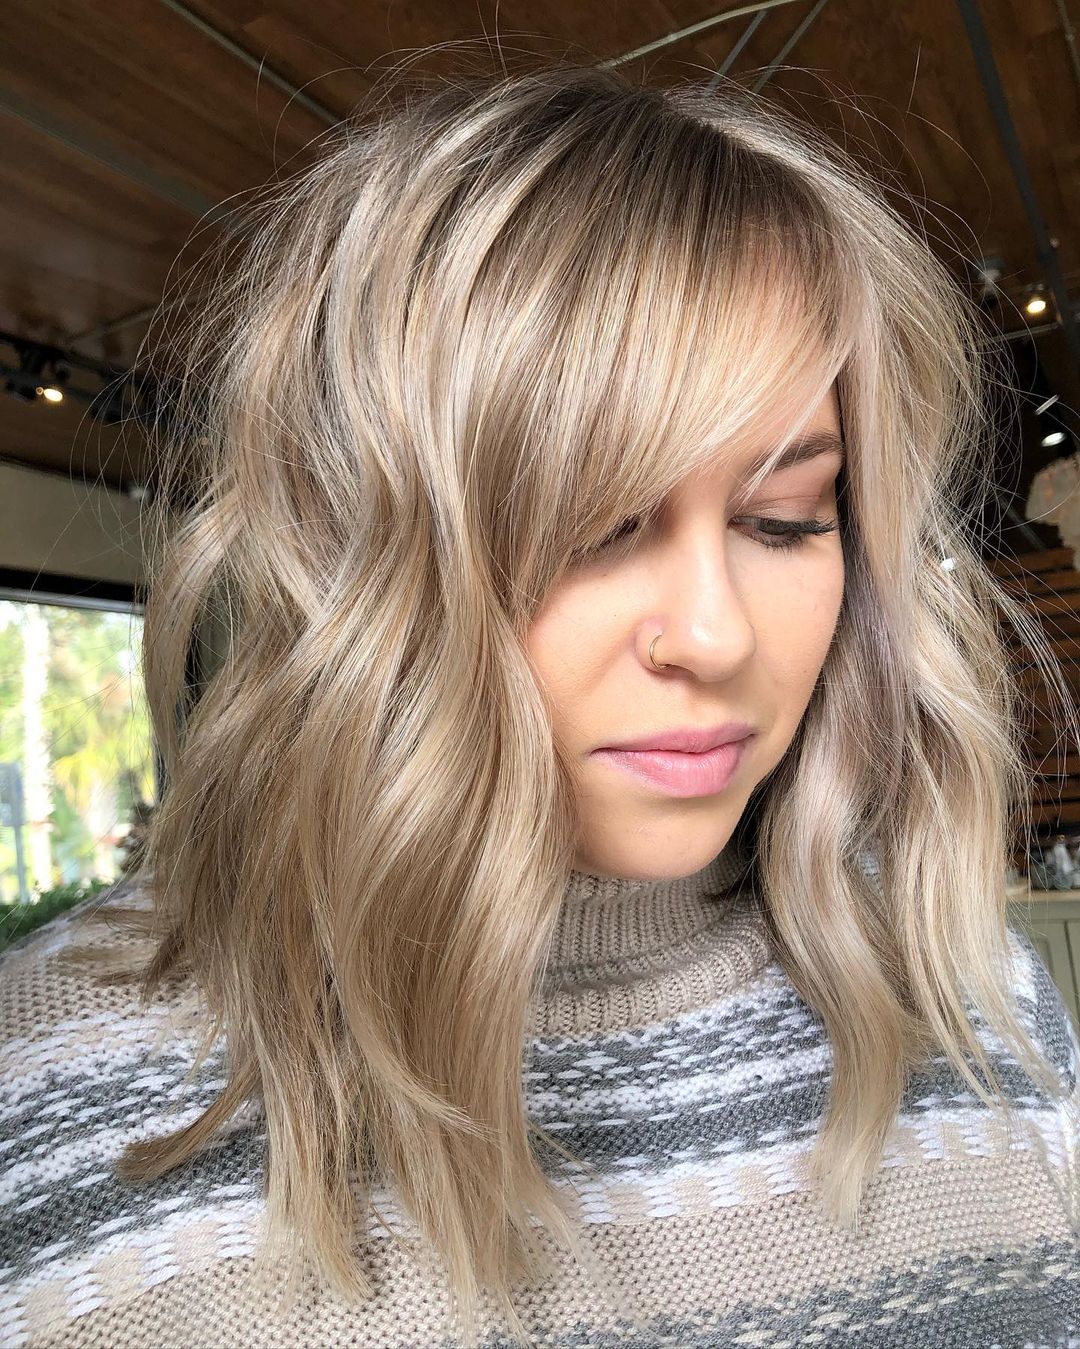 21 Side-Swept Bangs You Have to See